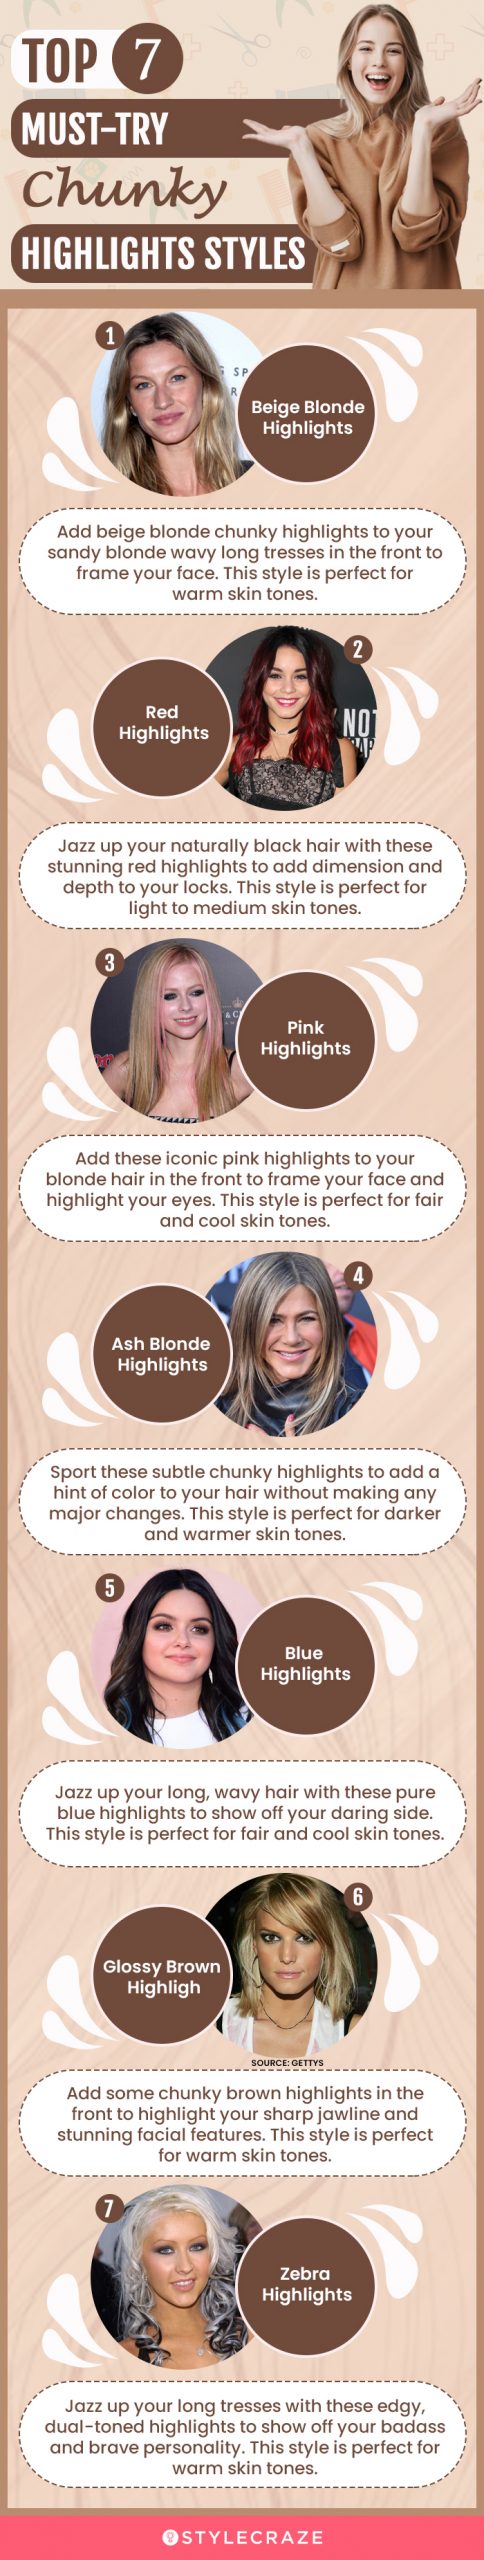 top 7 must try chunky highlights styles (infographic)